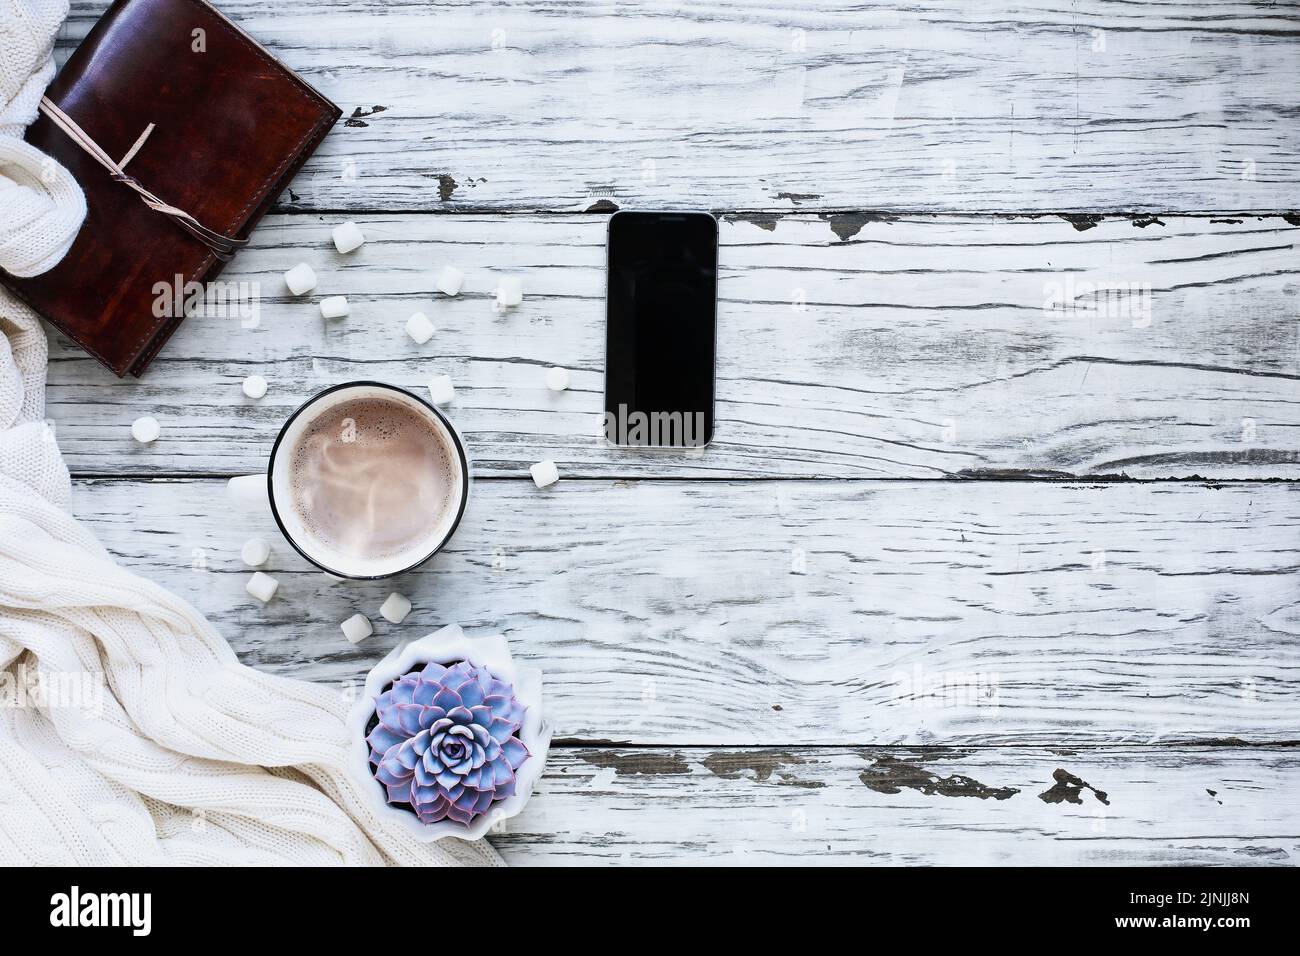 Autumn or winter background shot from top view with hot cocoa, houseplant, cell phone, book, and throw blanket over rustic white wood table. Stock Photo